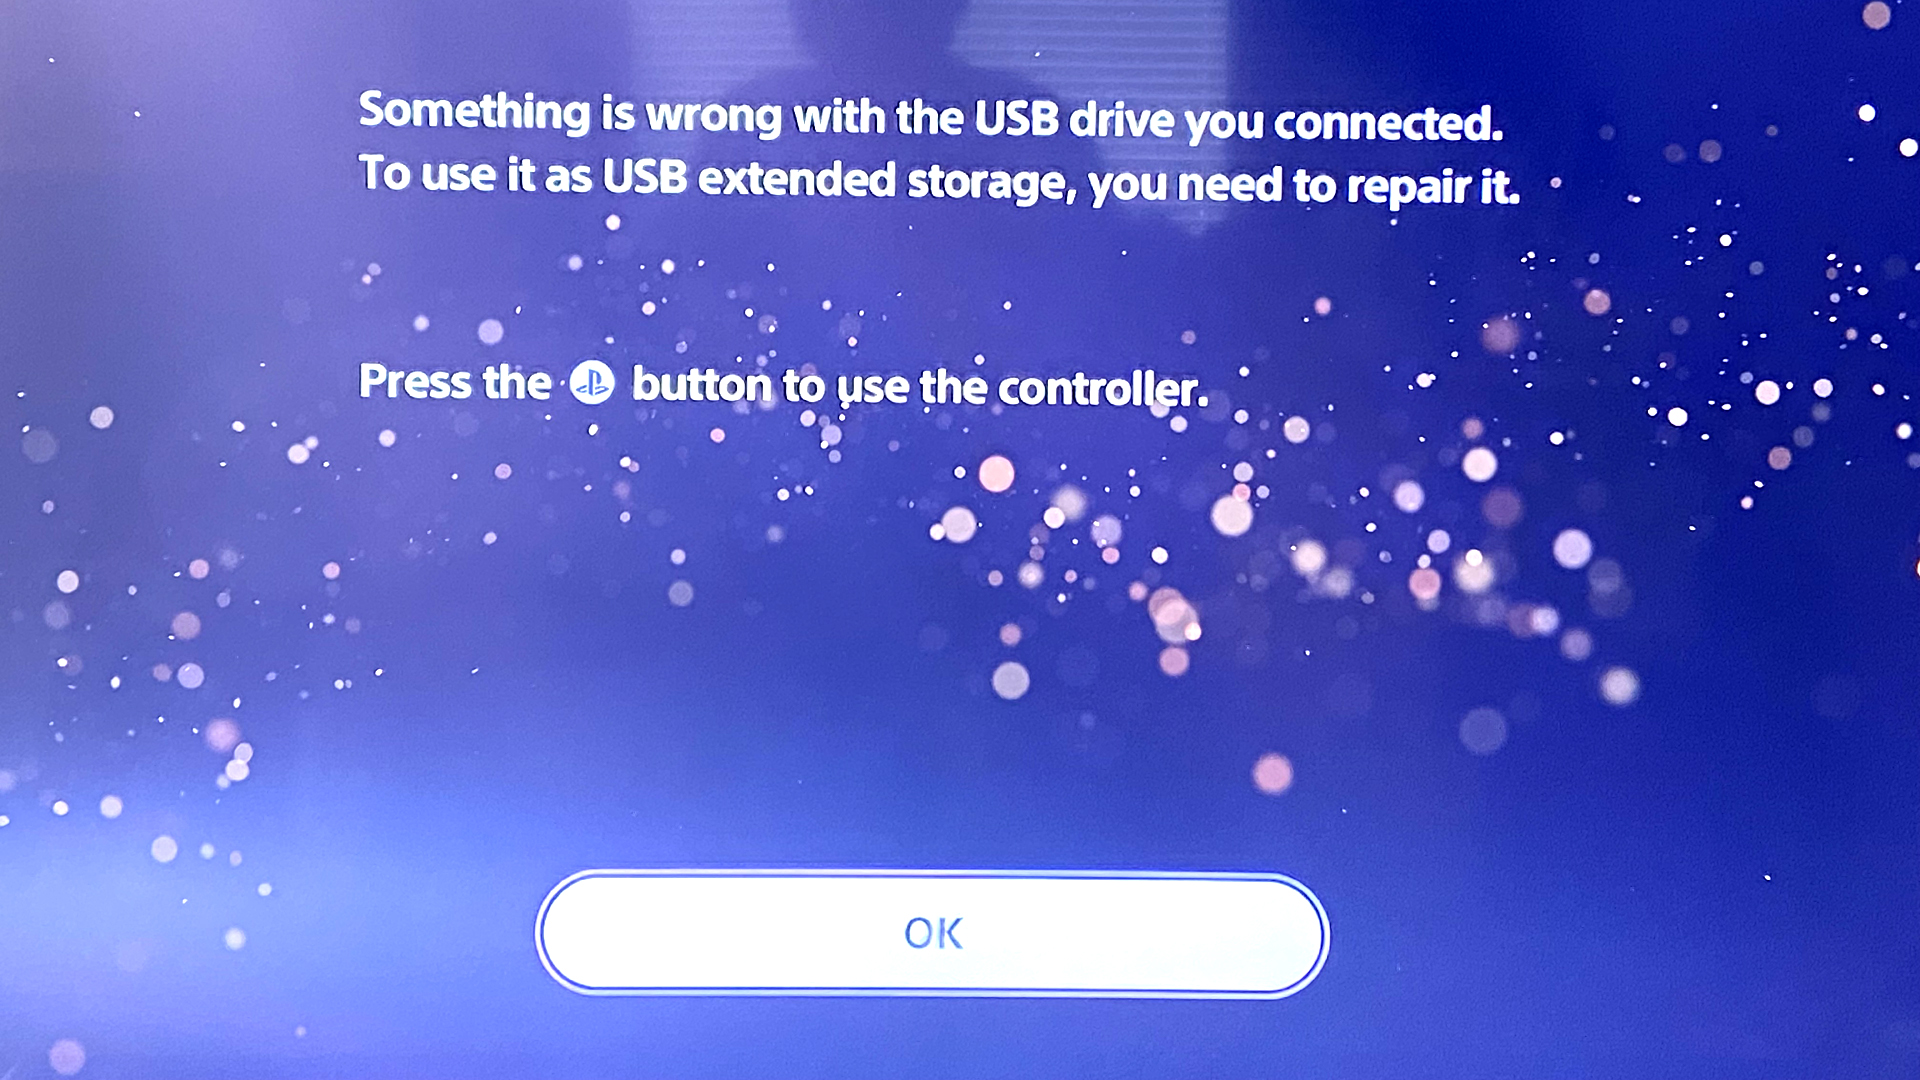 Something is wrong with the USB drive you connected